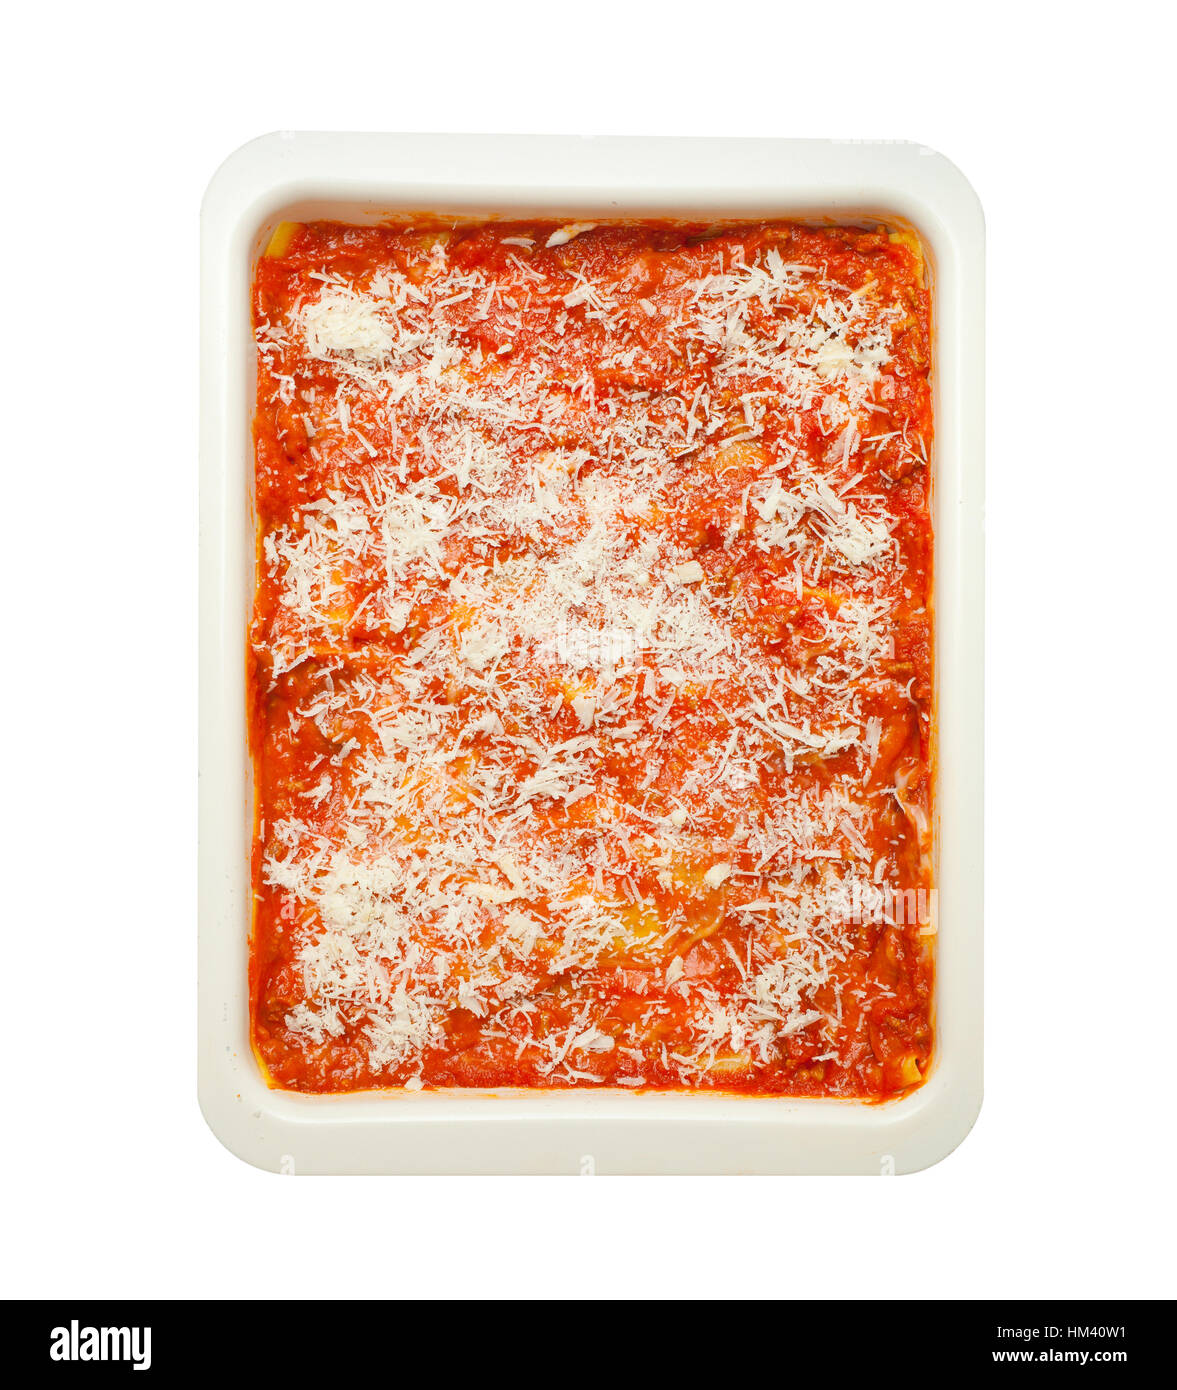 Homemade lasagna isolated on white background. Italian pasta recipe with tomato sauce and minced meat. Stock Photo